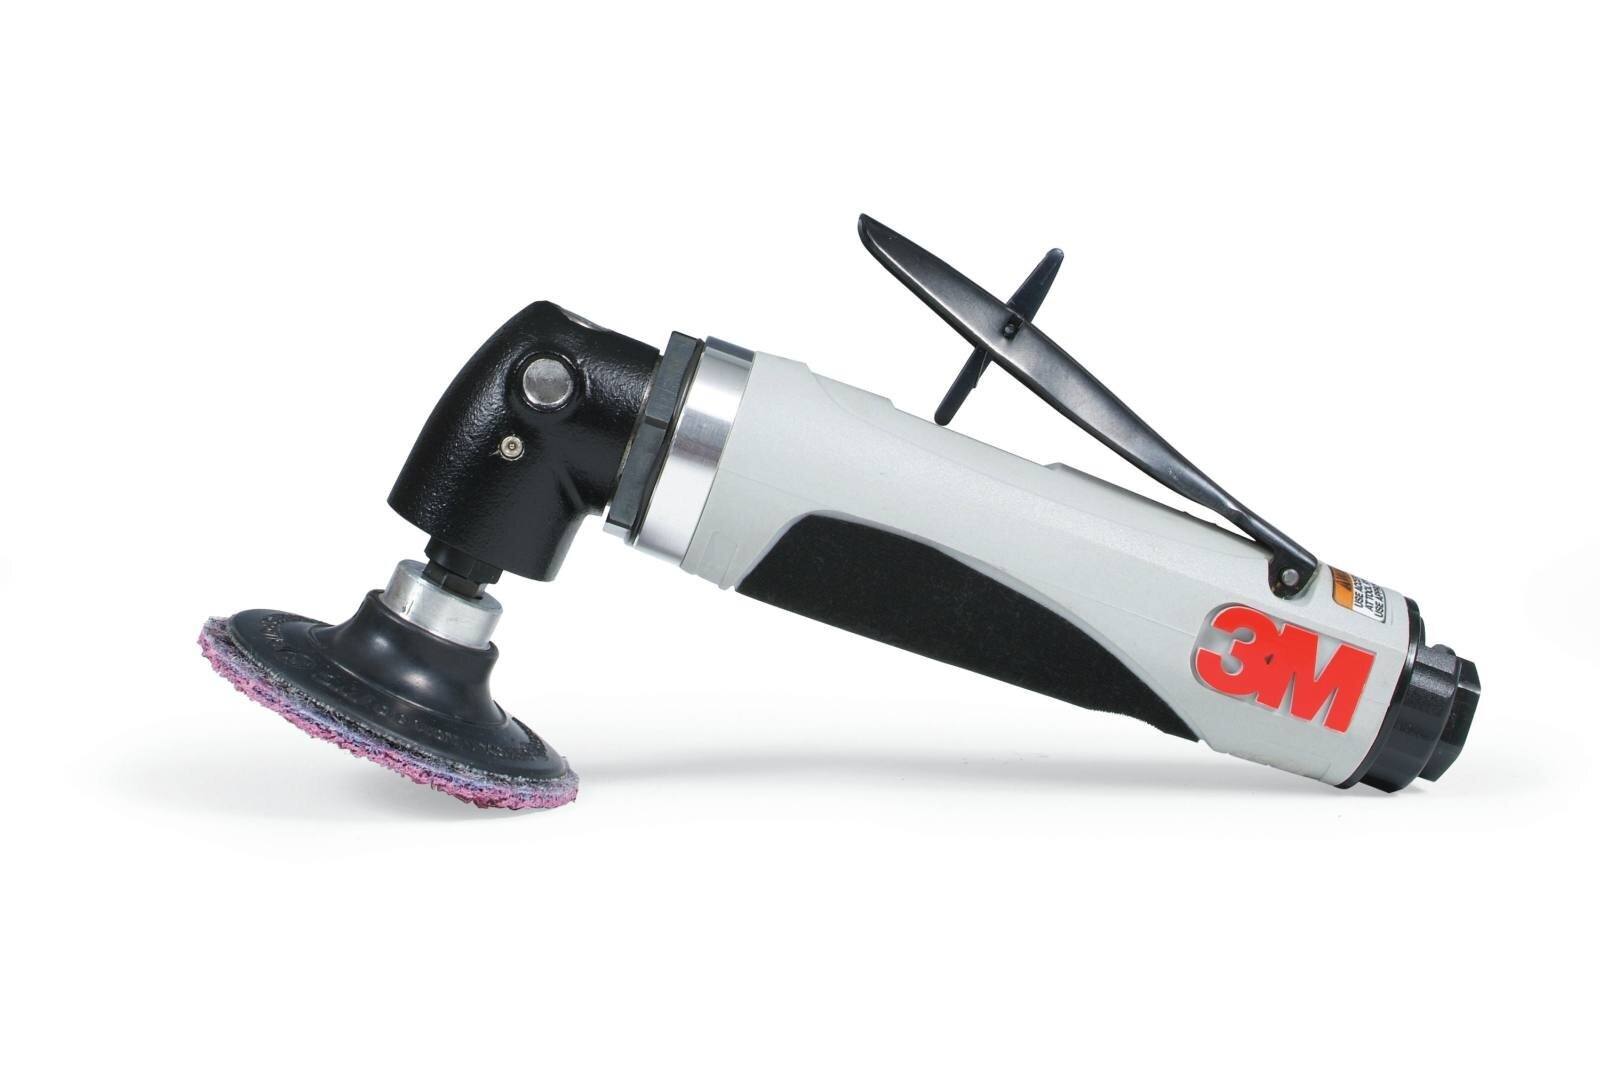 3M Roloc pneumatic angle grinder, 50 mm, 0.5 hp, 20,000 rpm, 6 mm collet #25124